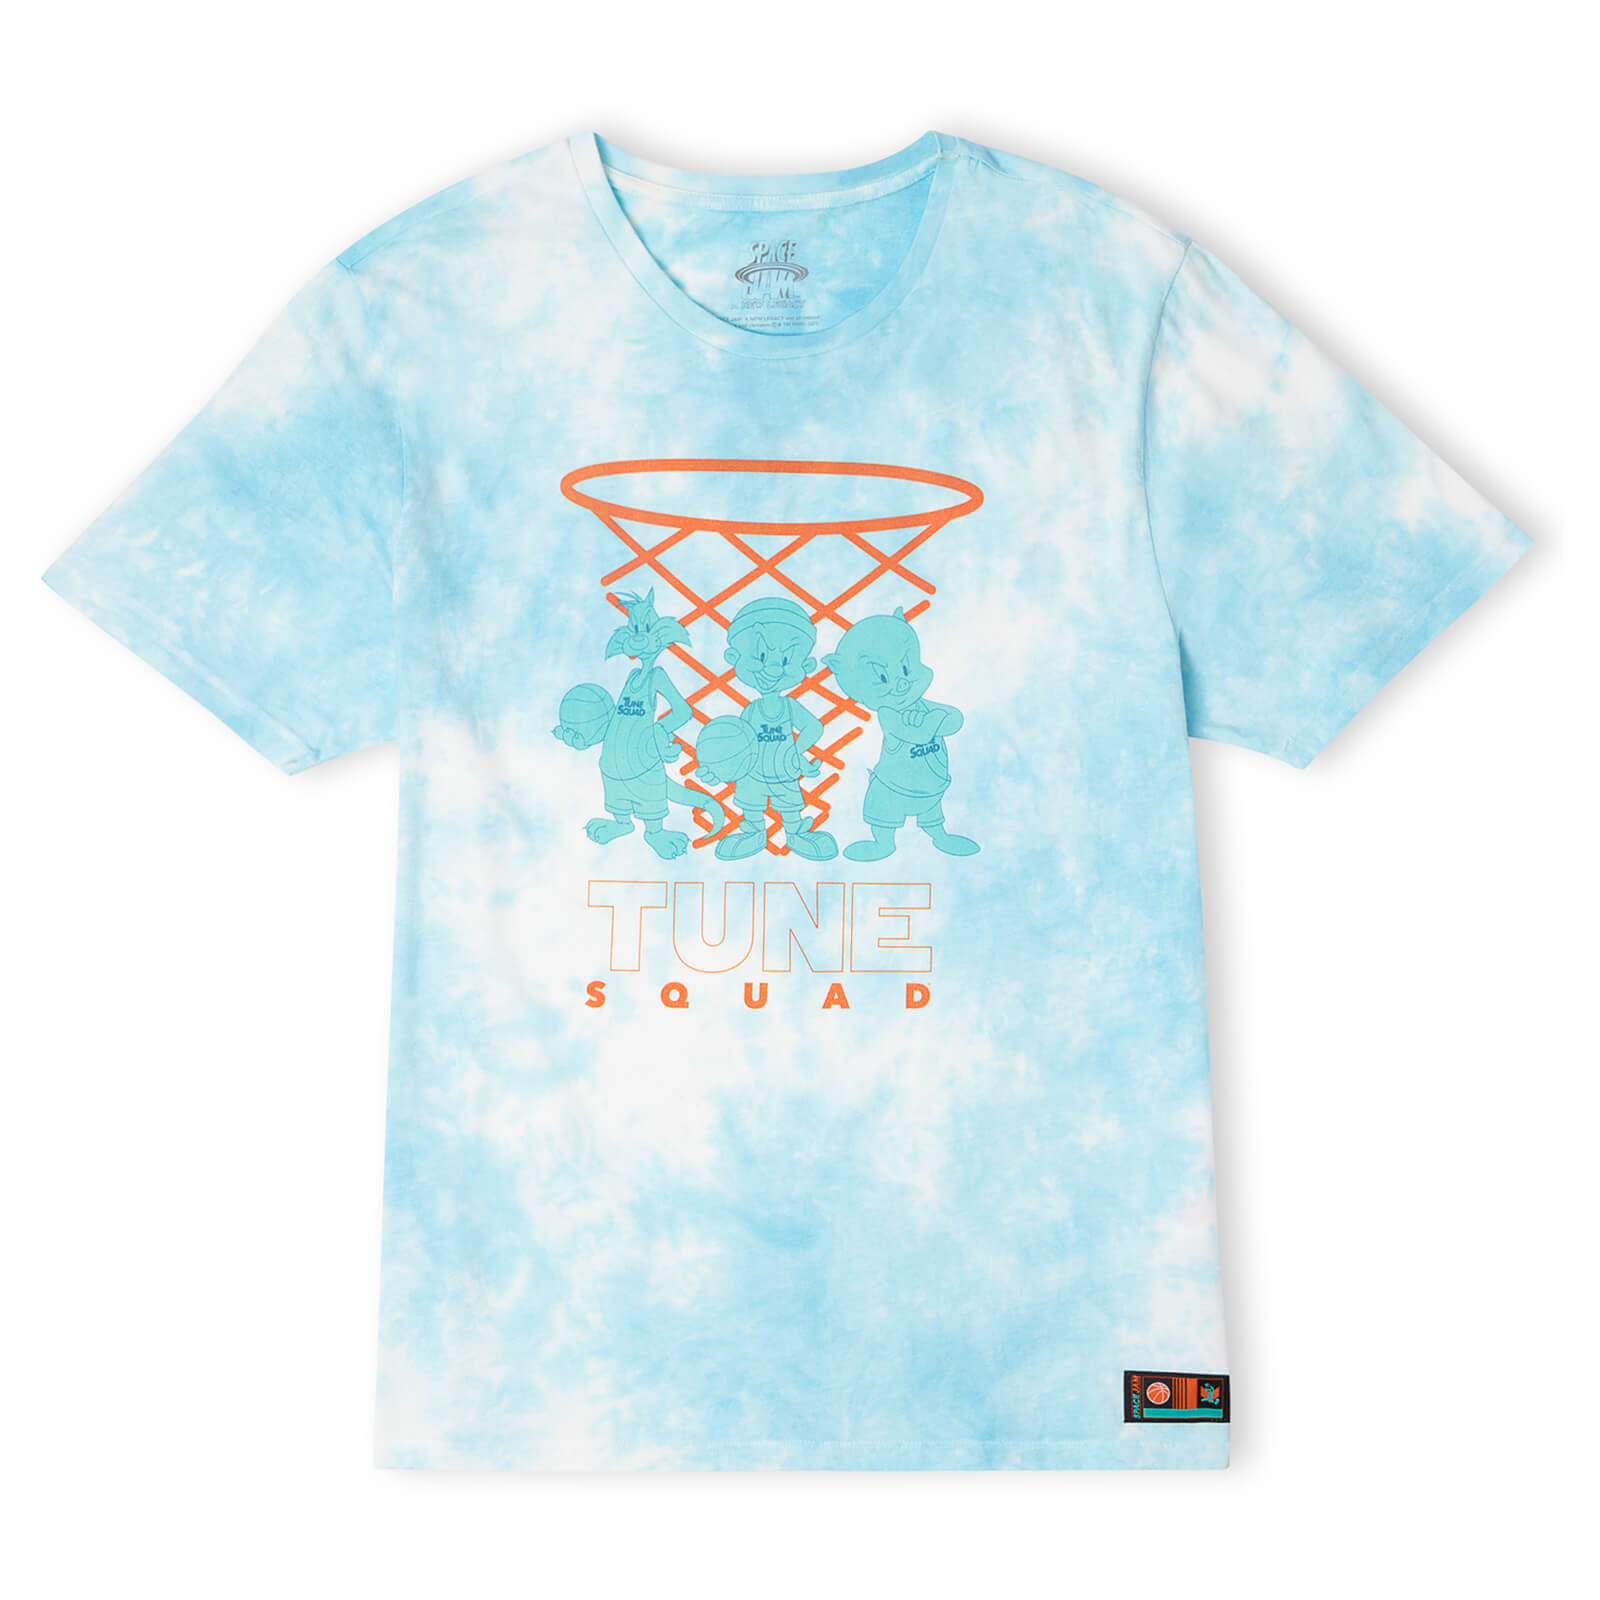 Image of Space Jam Tune Squad Characters Unisex T-Shirt - Turquoise Tie Dye - M - Turquoise Tie